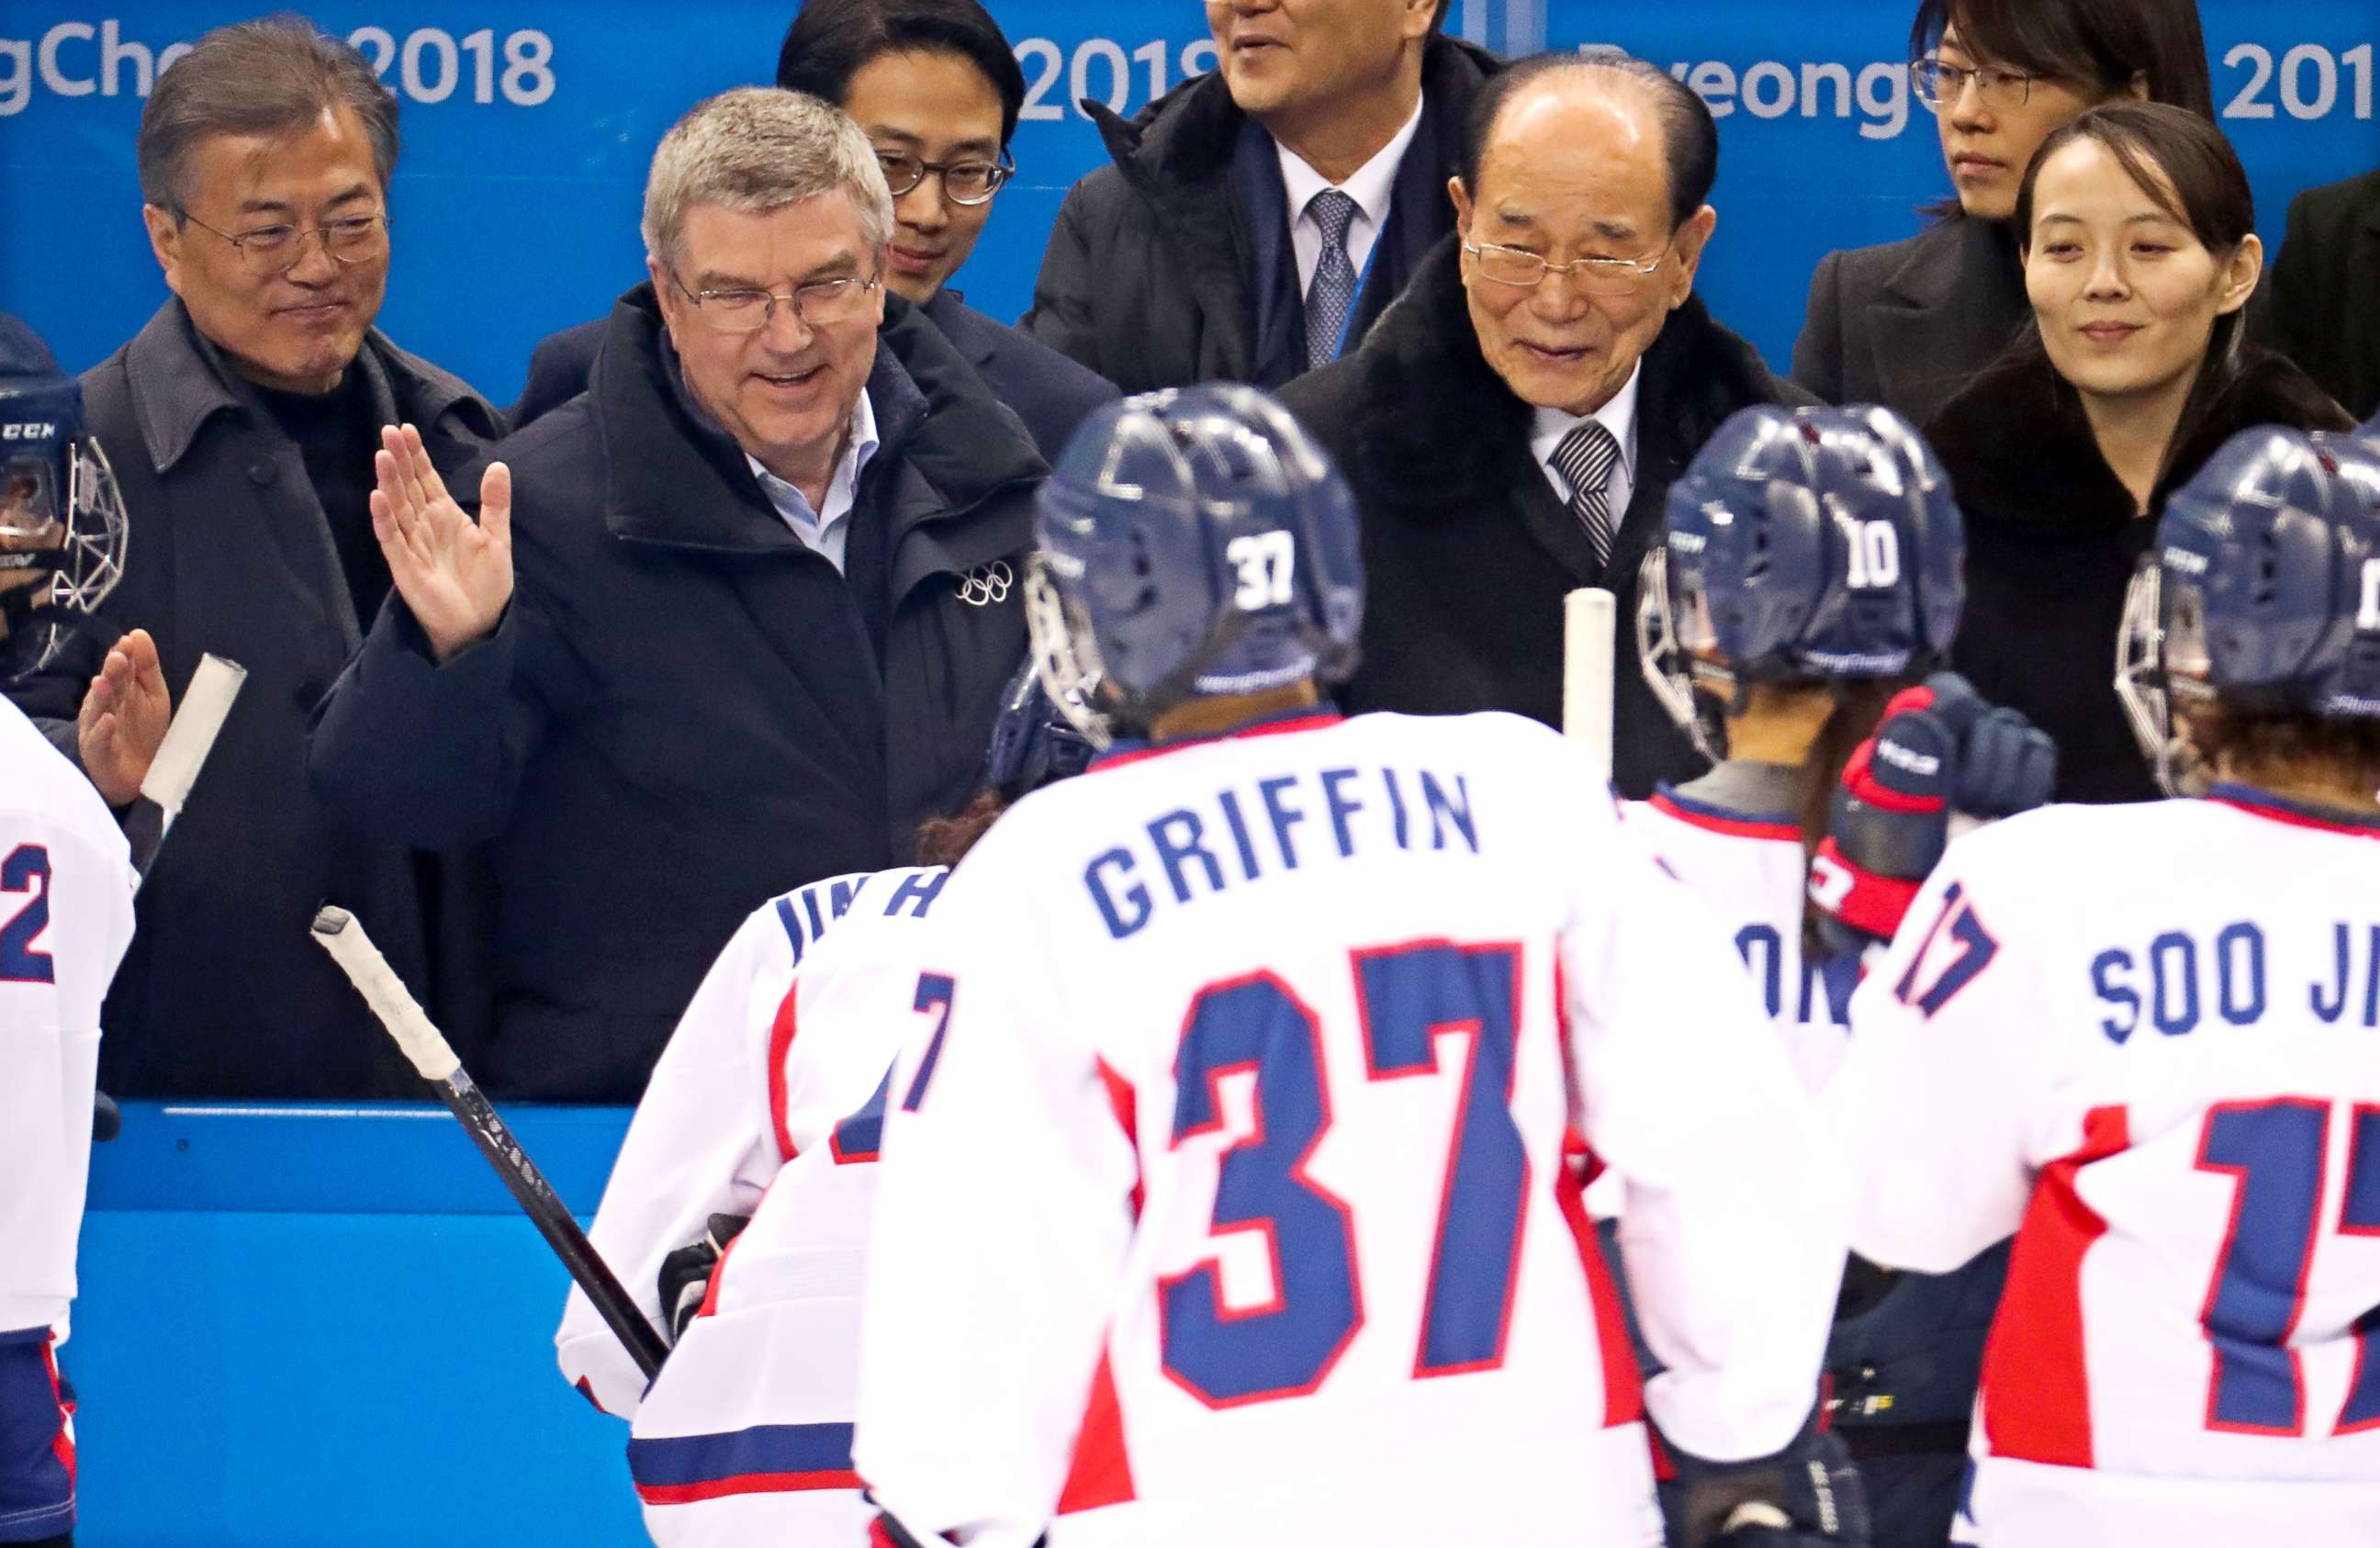 PHOTO: South Korean President Moon Jae-in, IOC President Thomas Bach, North Korea’s ceremonial head of state Kim Young-nam and Kim Yo-jong, the sister to Kim Jong-un, as they greeted the Korean Hockey team after their loss to Switzerland, Feb. 10, 2018.